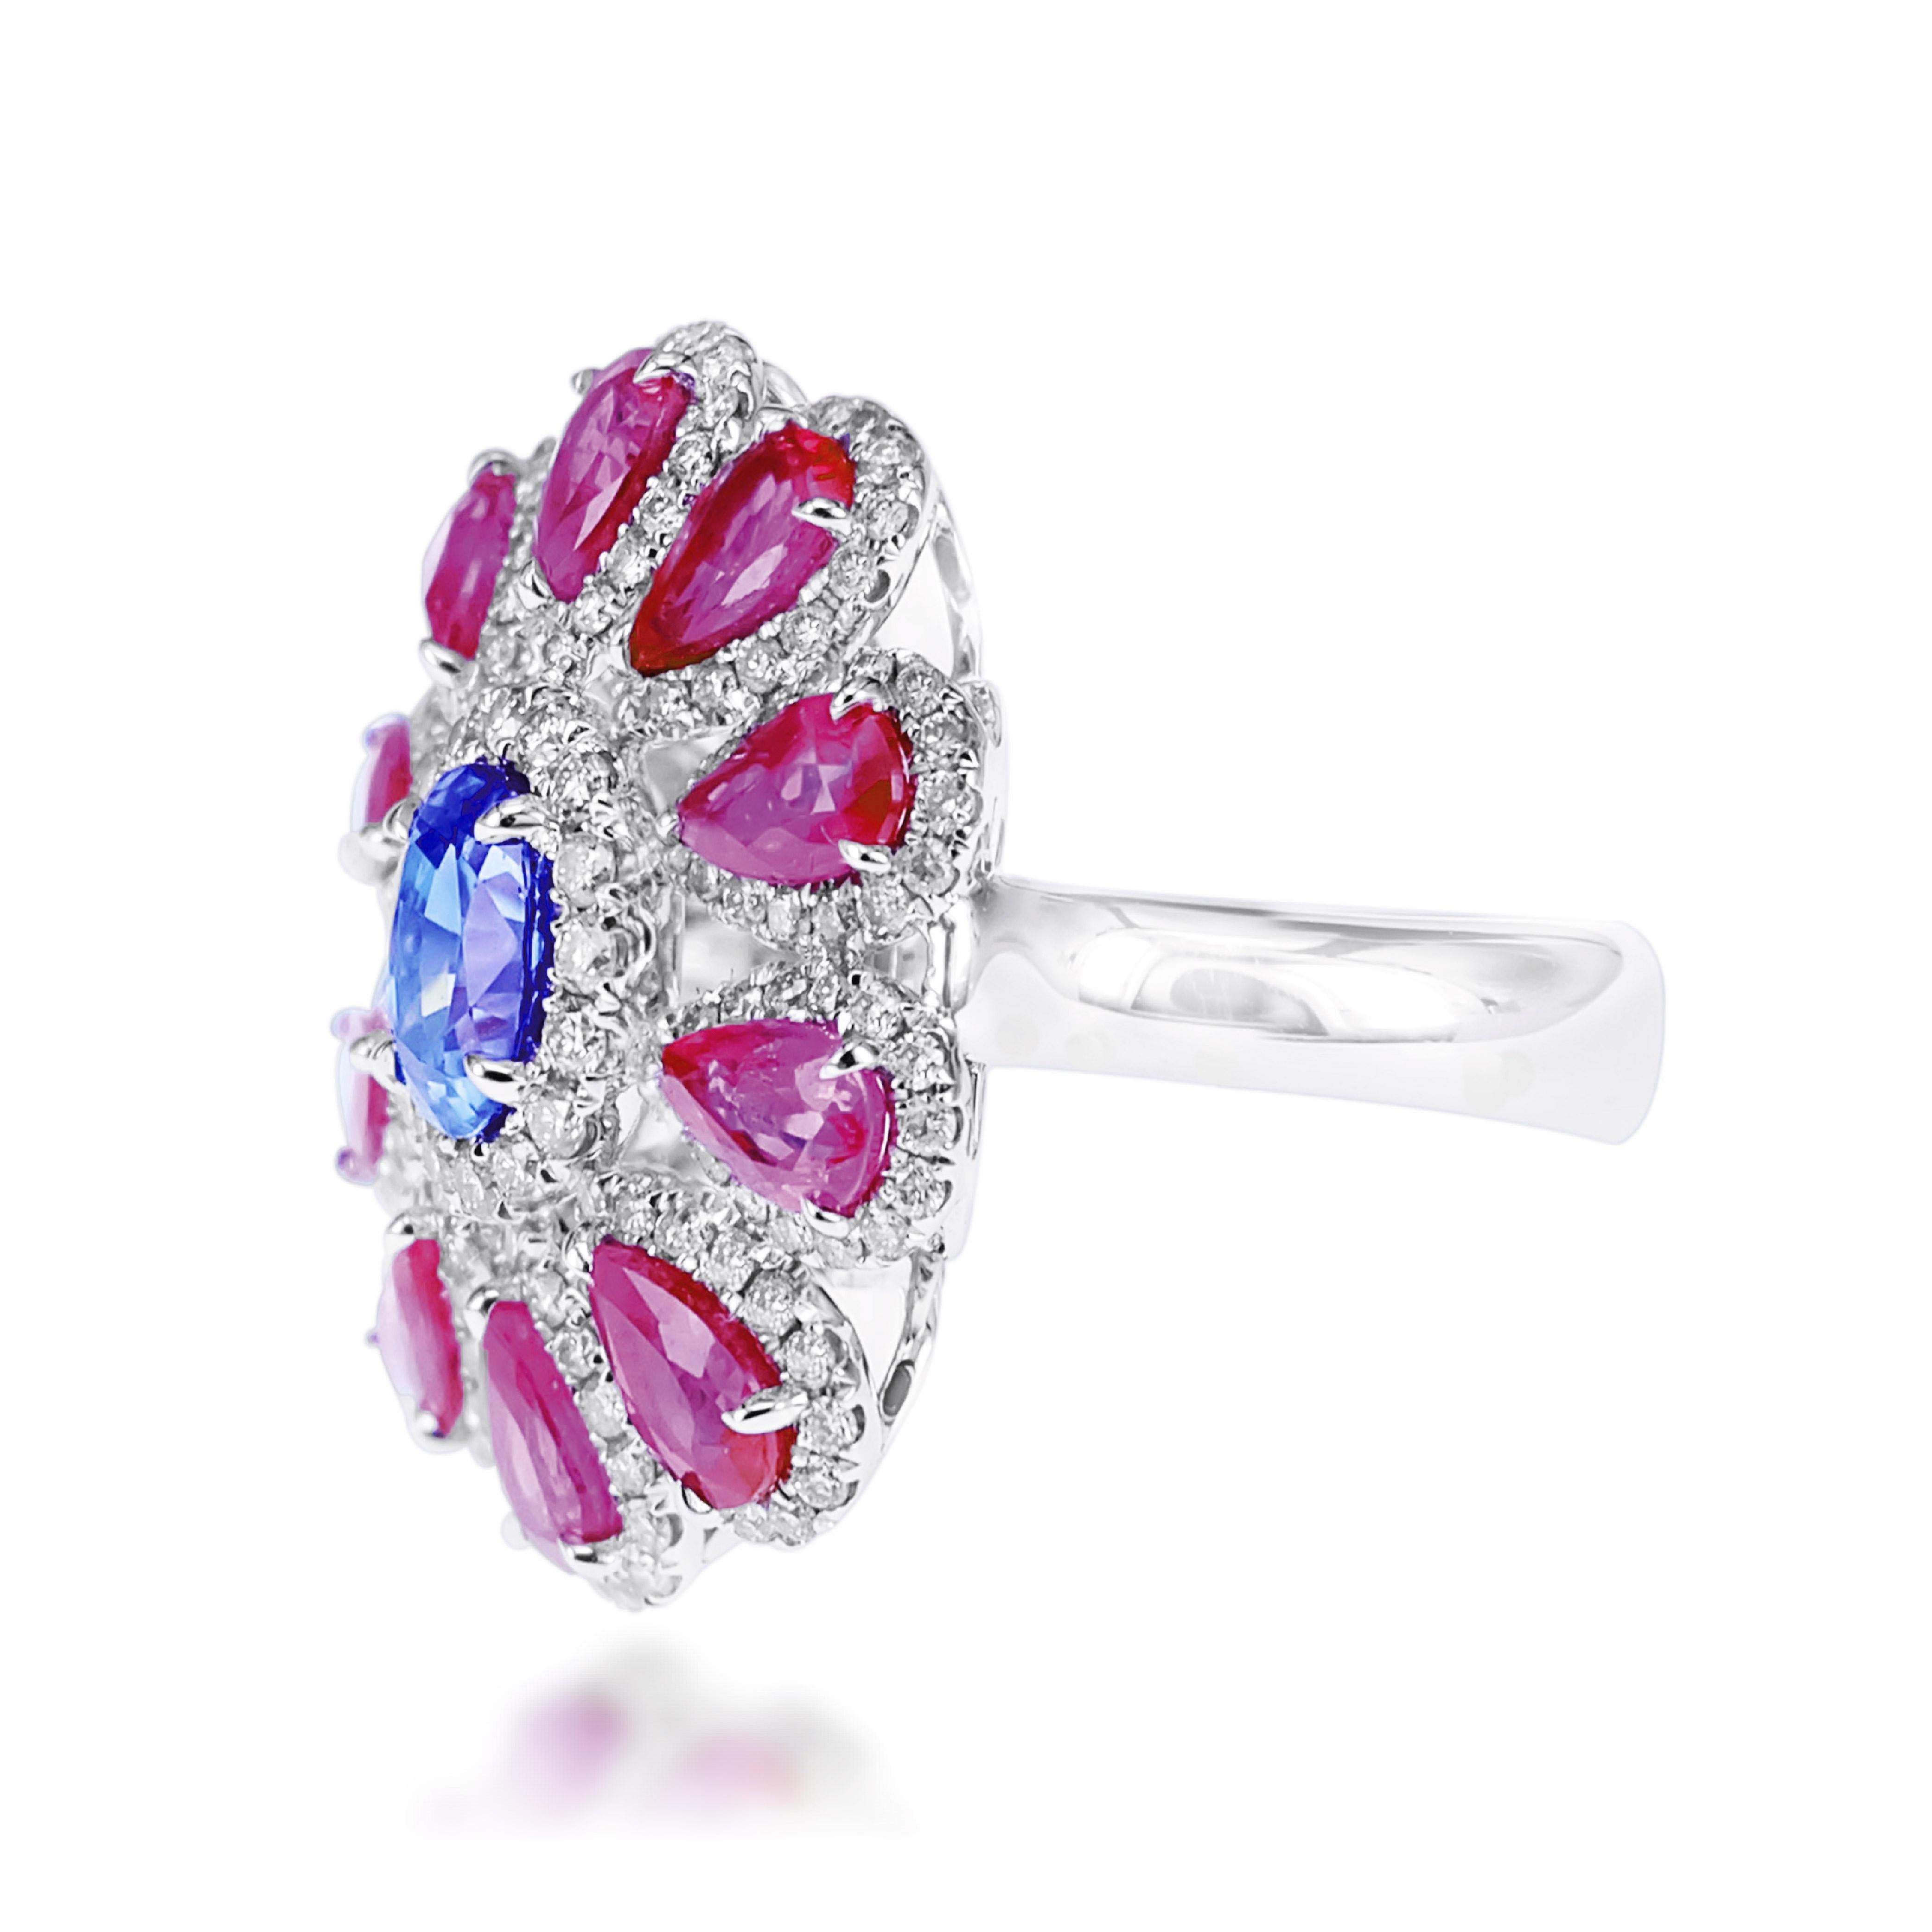 An elegant mix of 1.21 carats of deep blue sapphire and 2.68 carat of vivid red ruby makes it one of the top most picks from Malpani Collection.
Also the ring consists of 0.72 carats of white round brilliant diamond.
The details of the ring are as